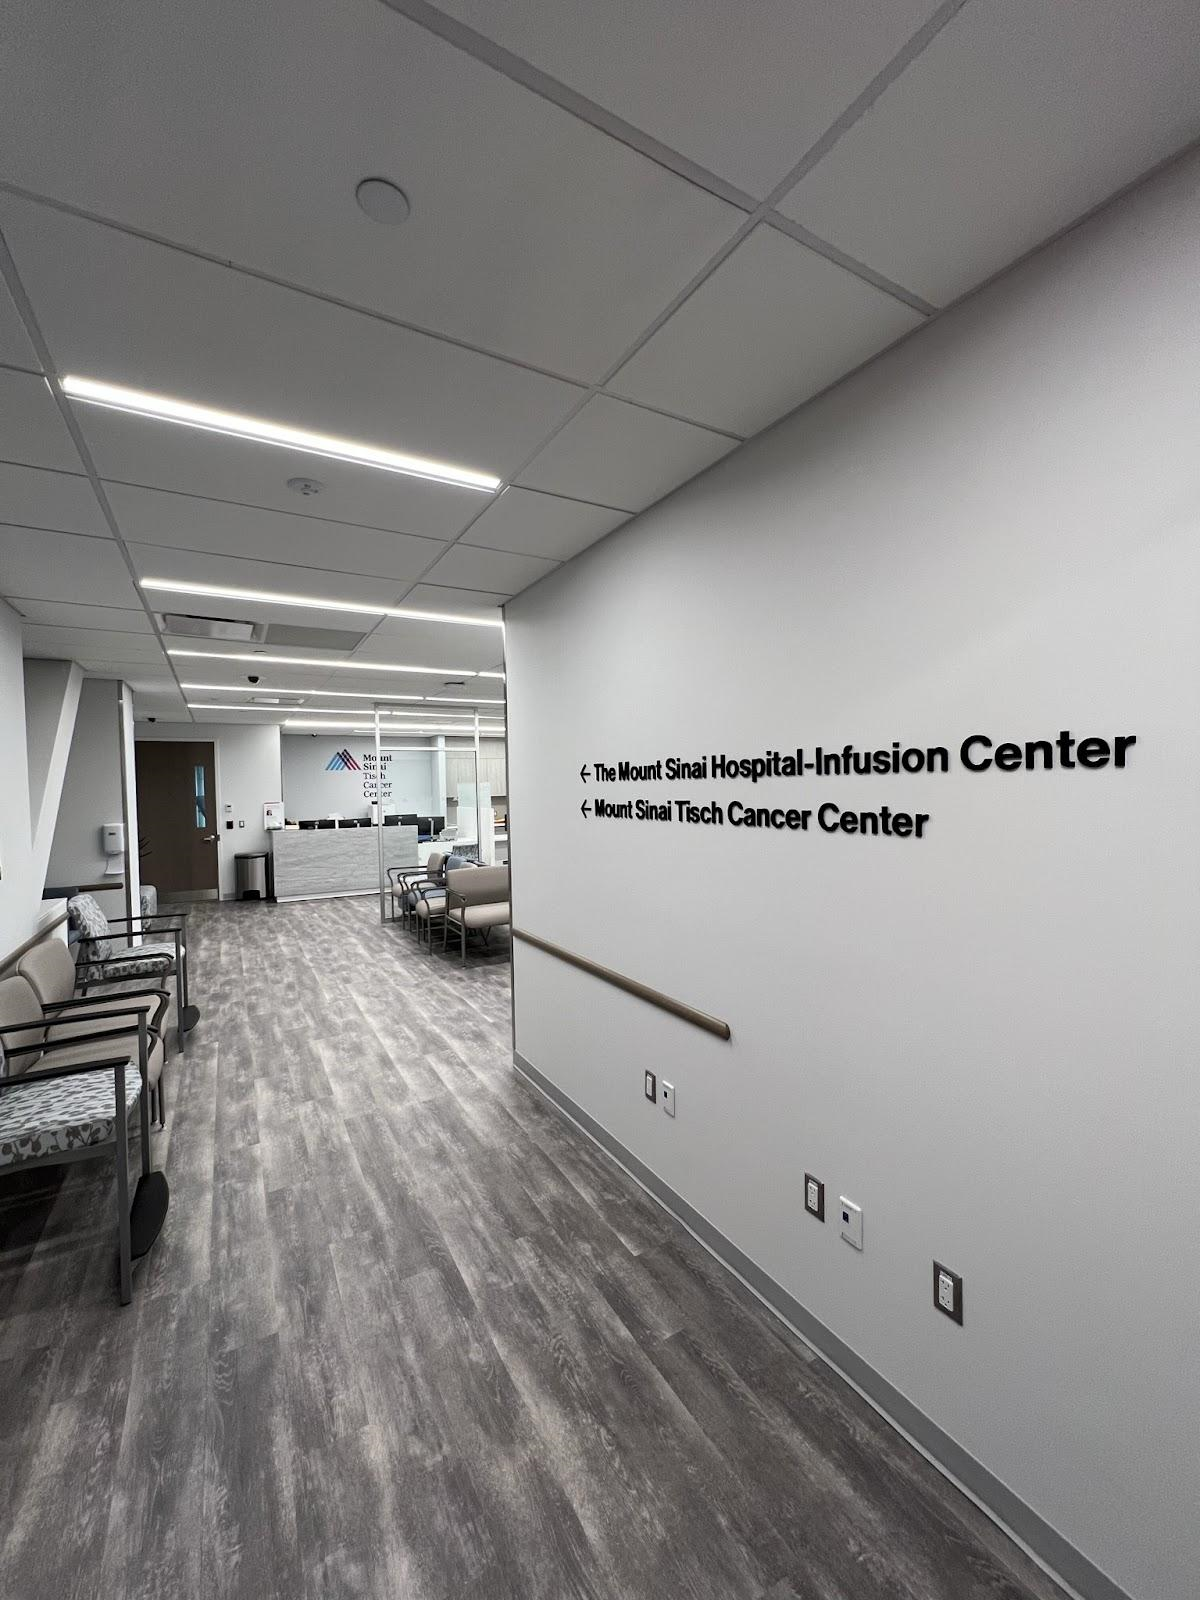 Project Spotlight: Infusion Center for Mount Sinai Hospital